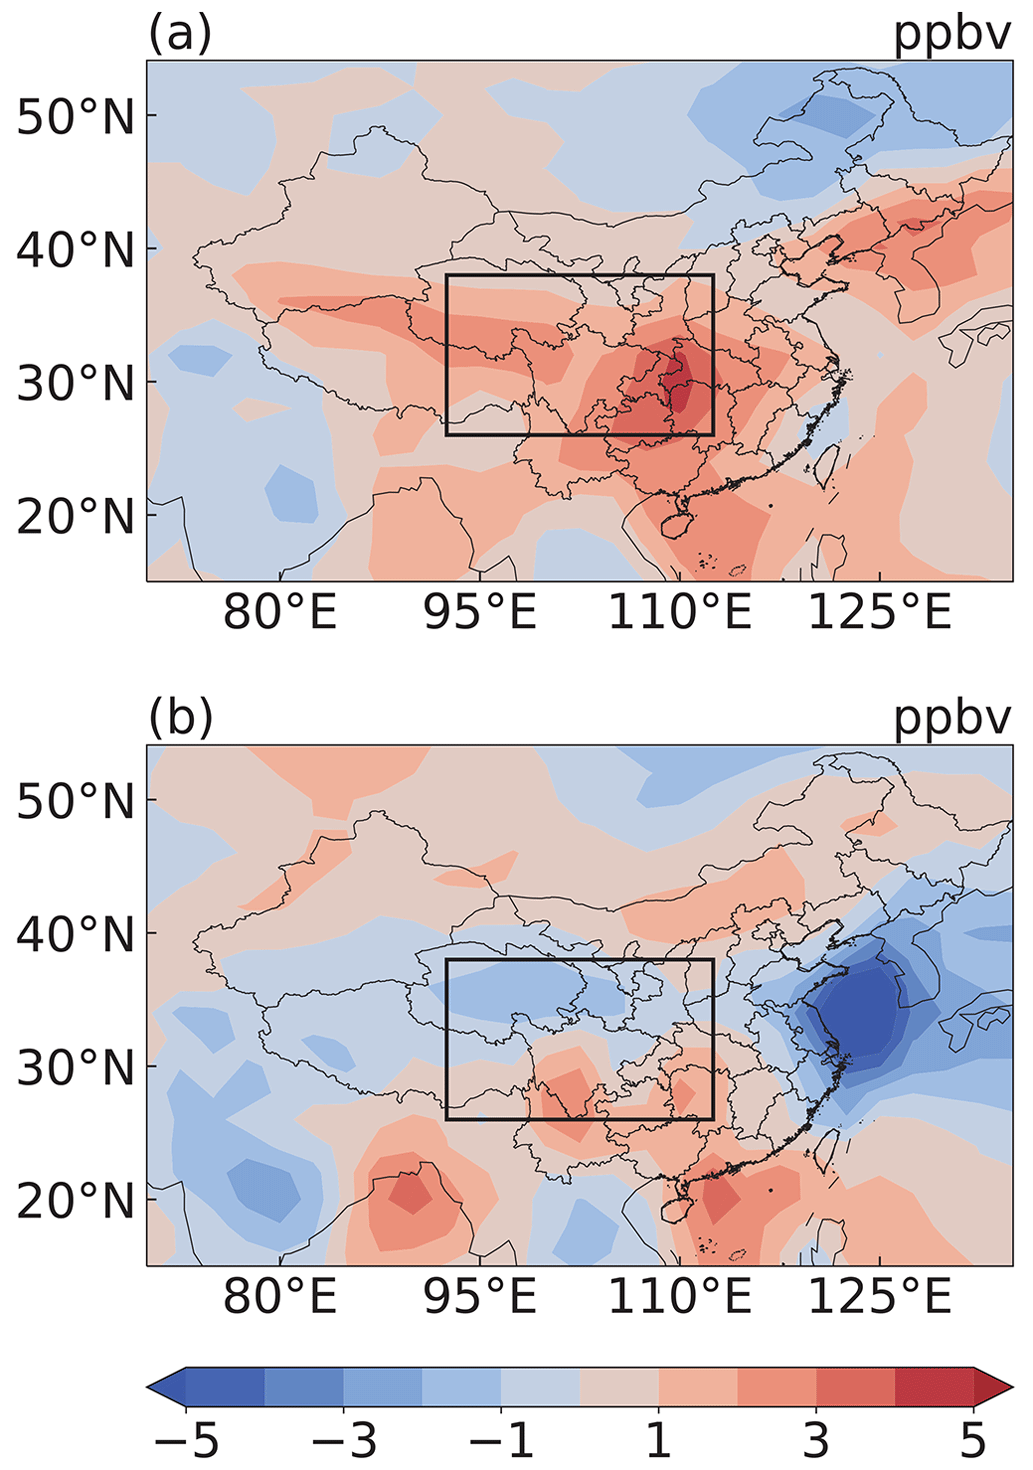 ACP - Summertime ozone pollution in China affected by 